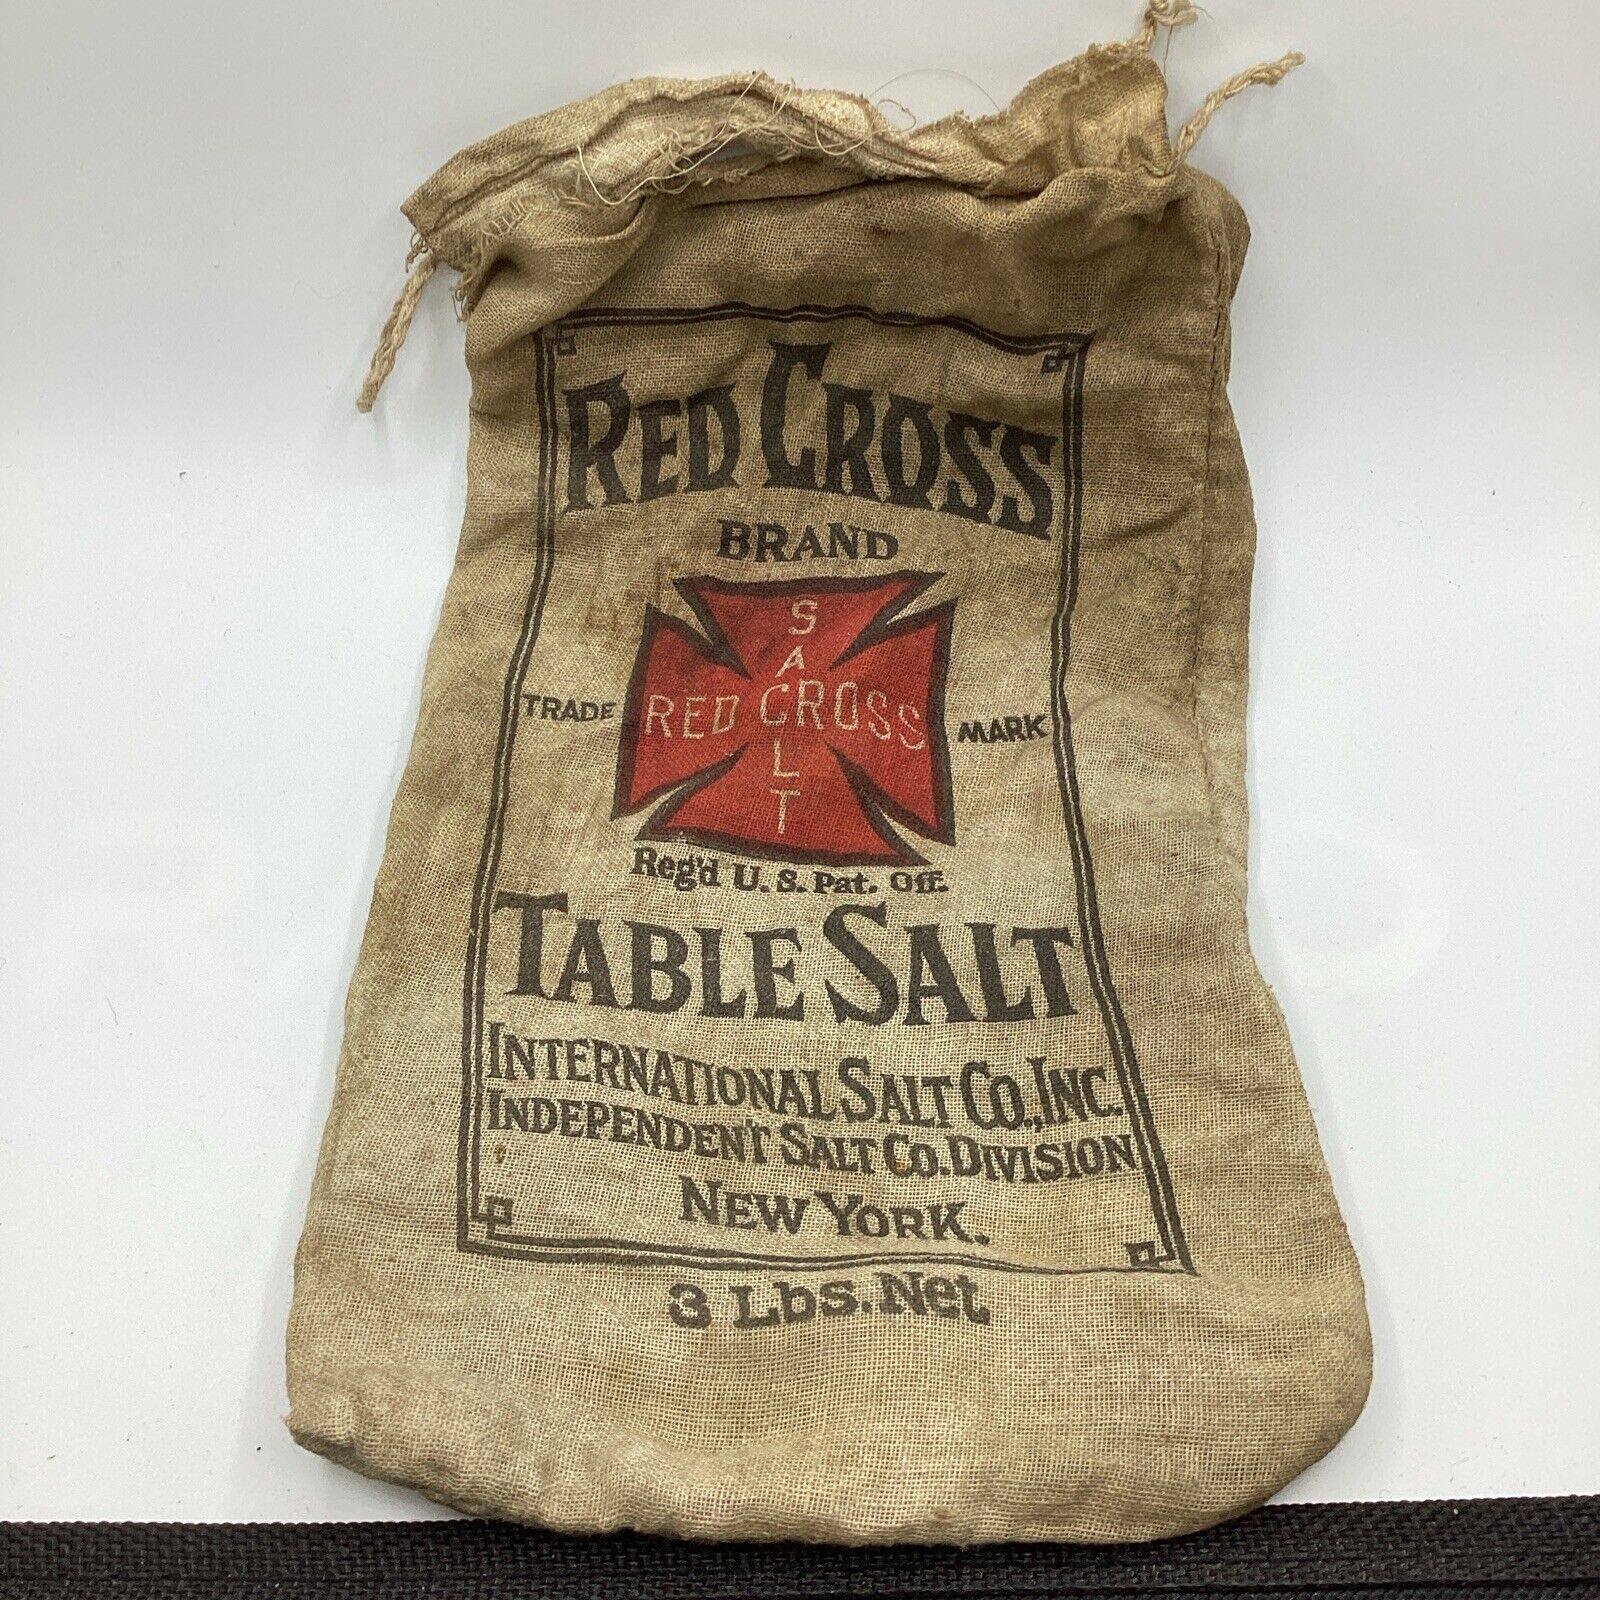 Antique Early 1900’s Red Cross Brand 3 Pound Cloth Table Salt Sack